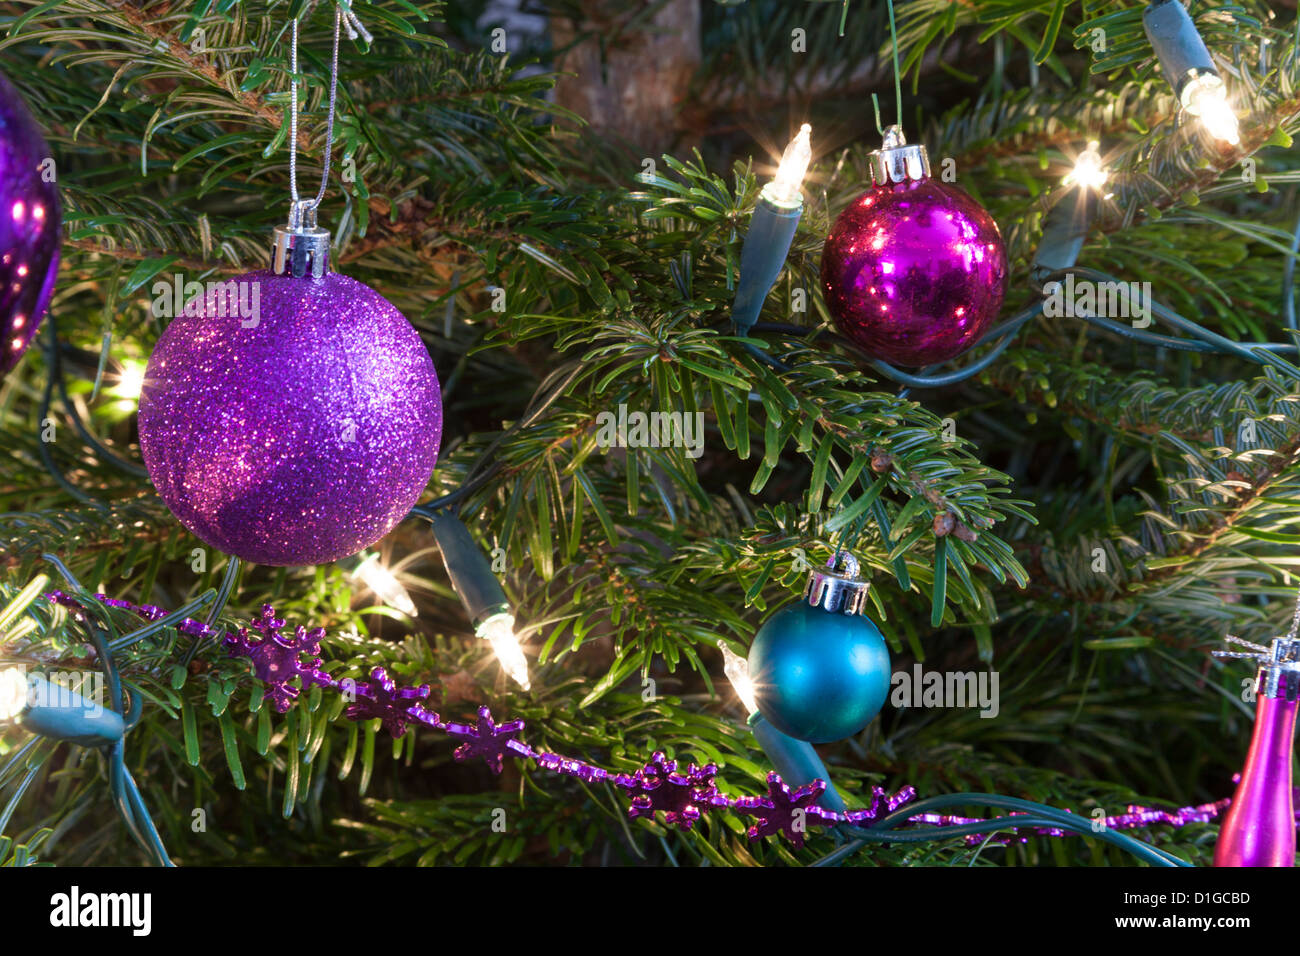 Christmas tree Hordman pine fir decorated with twinkling lights and baubles in green purple and pink, some blurred out of focus Stock Photo